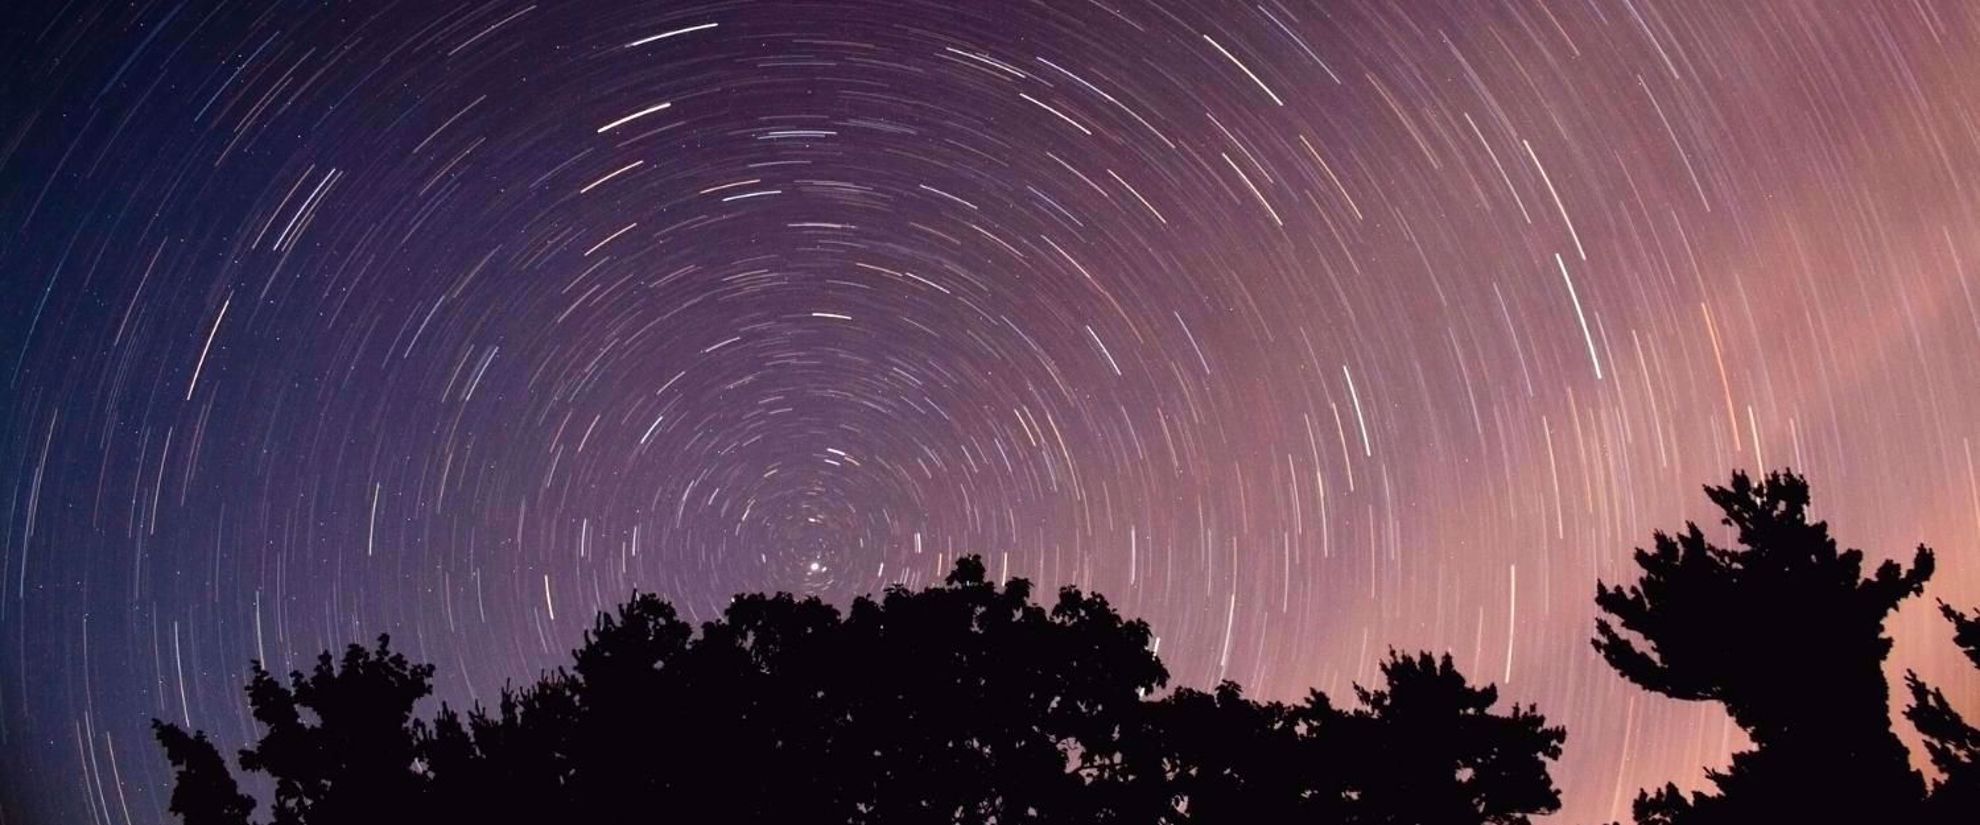 stargazing from the wilds of Maine